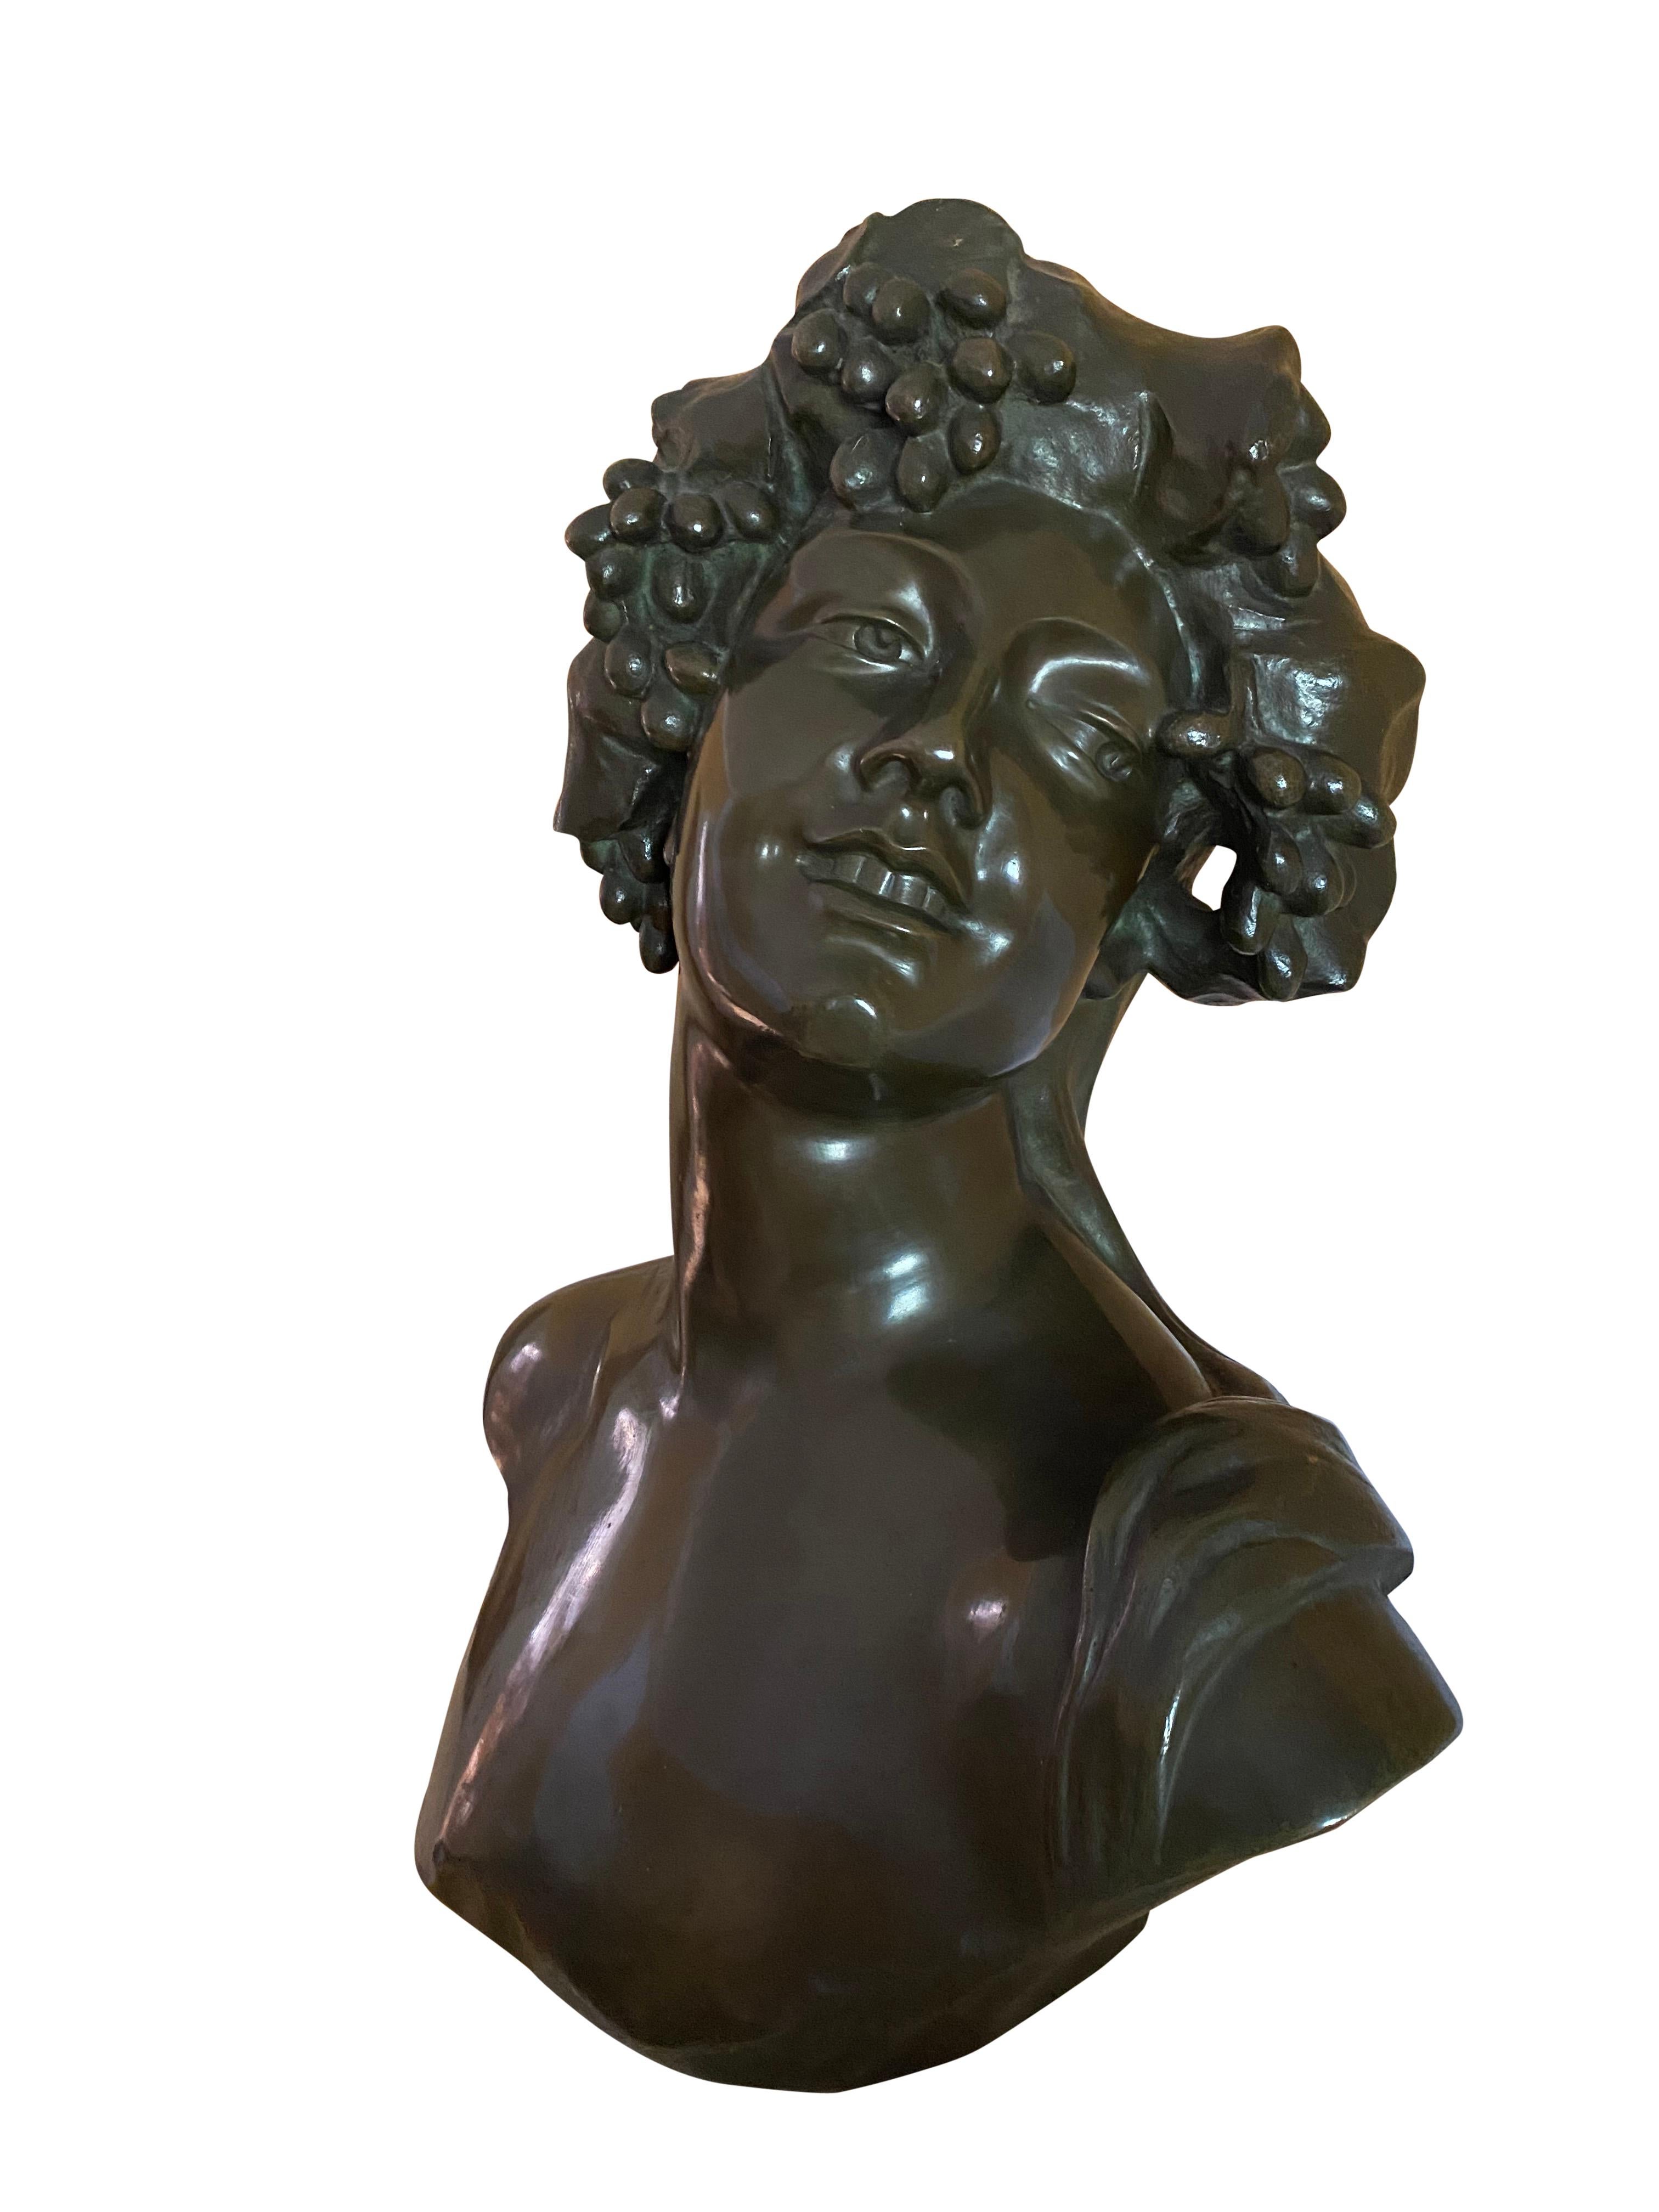 Bronze bust of Bacchus the god of wine and intoxication, 19th century. Bacchus, also known as Dionysus was the Greek god of wine, inebriation, fertility and theatre. He is known to be joyous and kind to those who admire him, yet cruel and